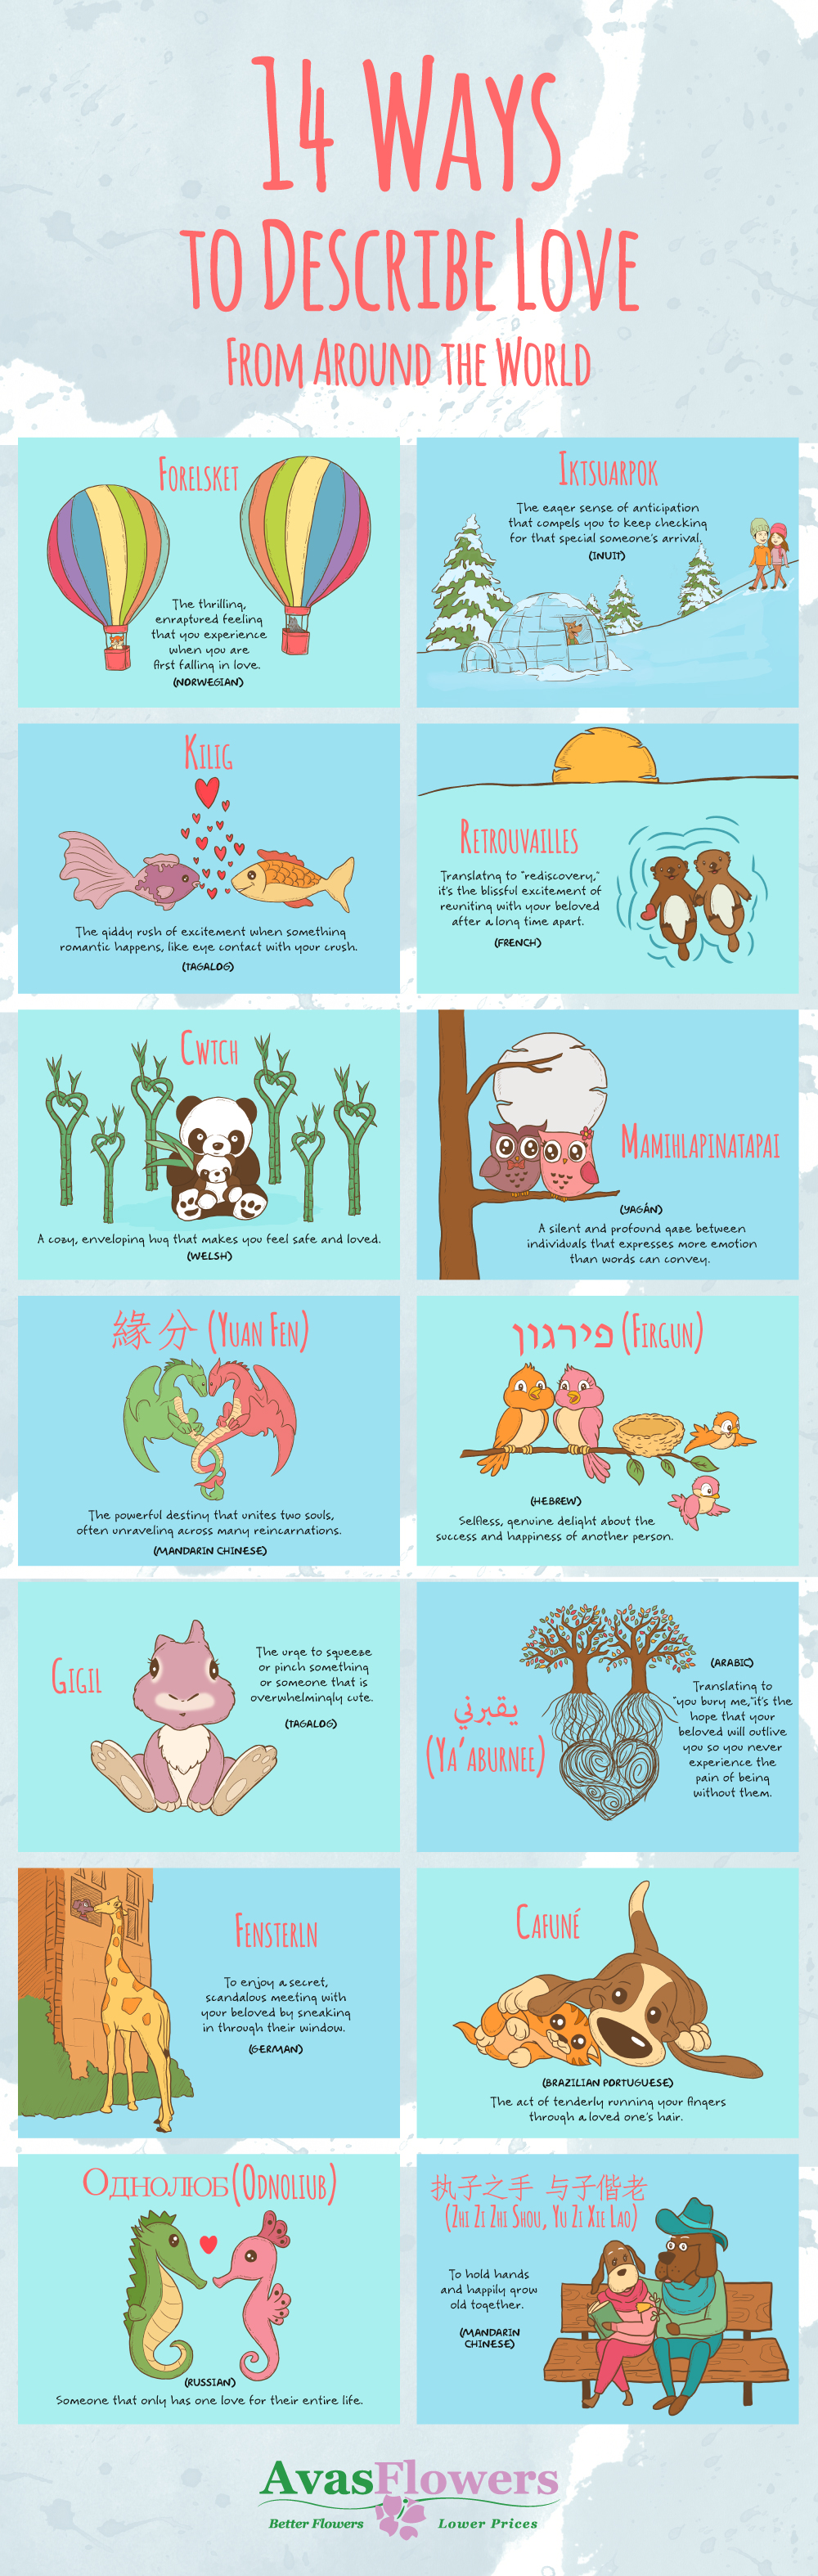 14 Ways to Describe Love From Around the World - Avasflowers.net - Infographic